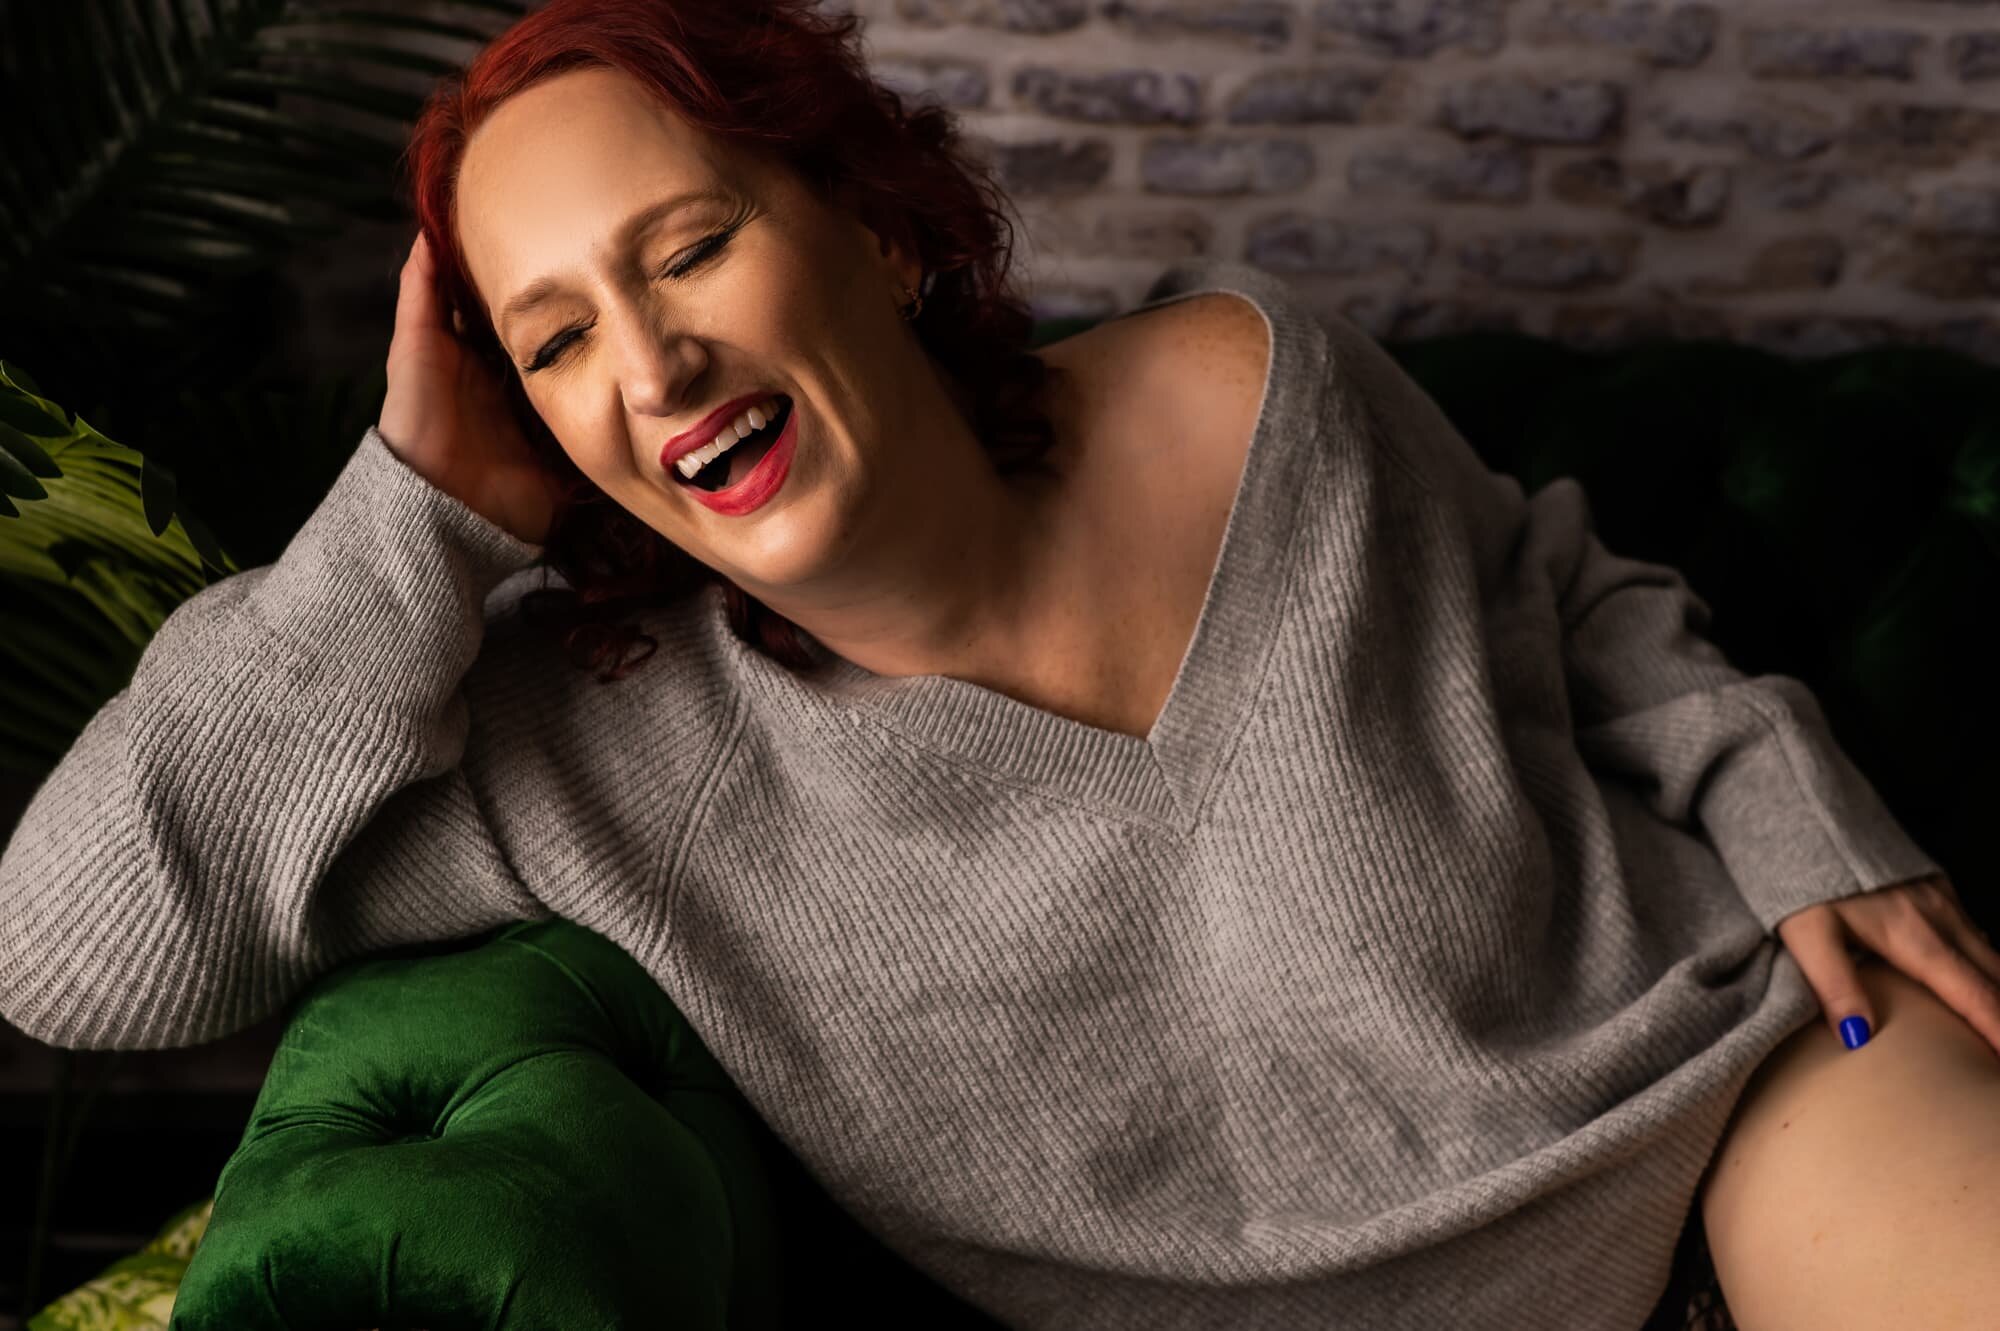 A woman laughing in a sweater at a boudoir studio in rochester new york.